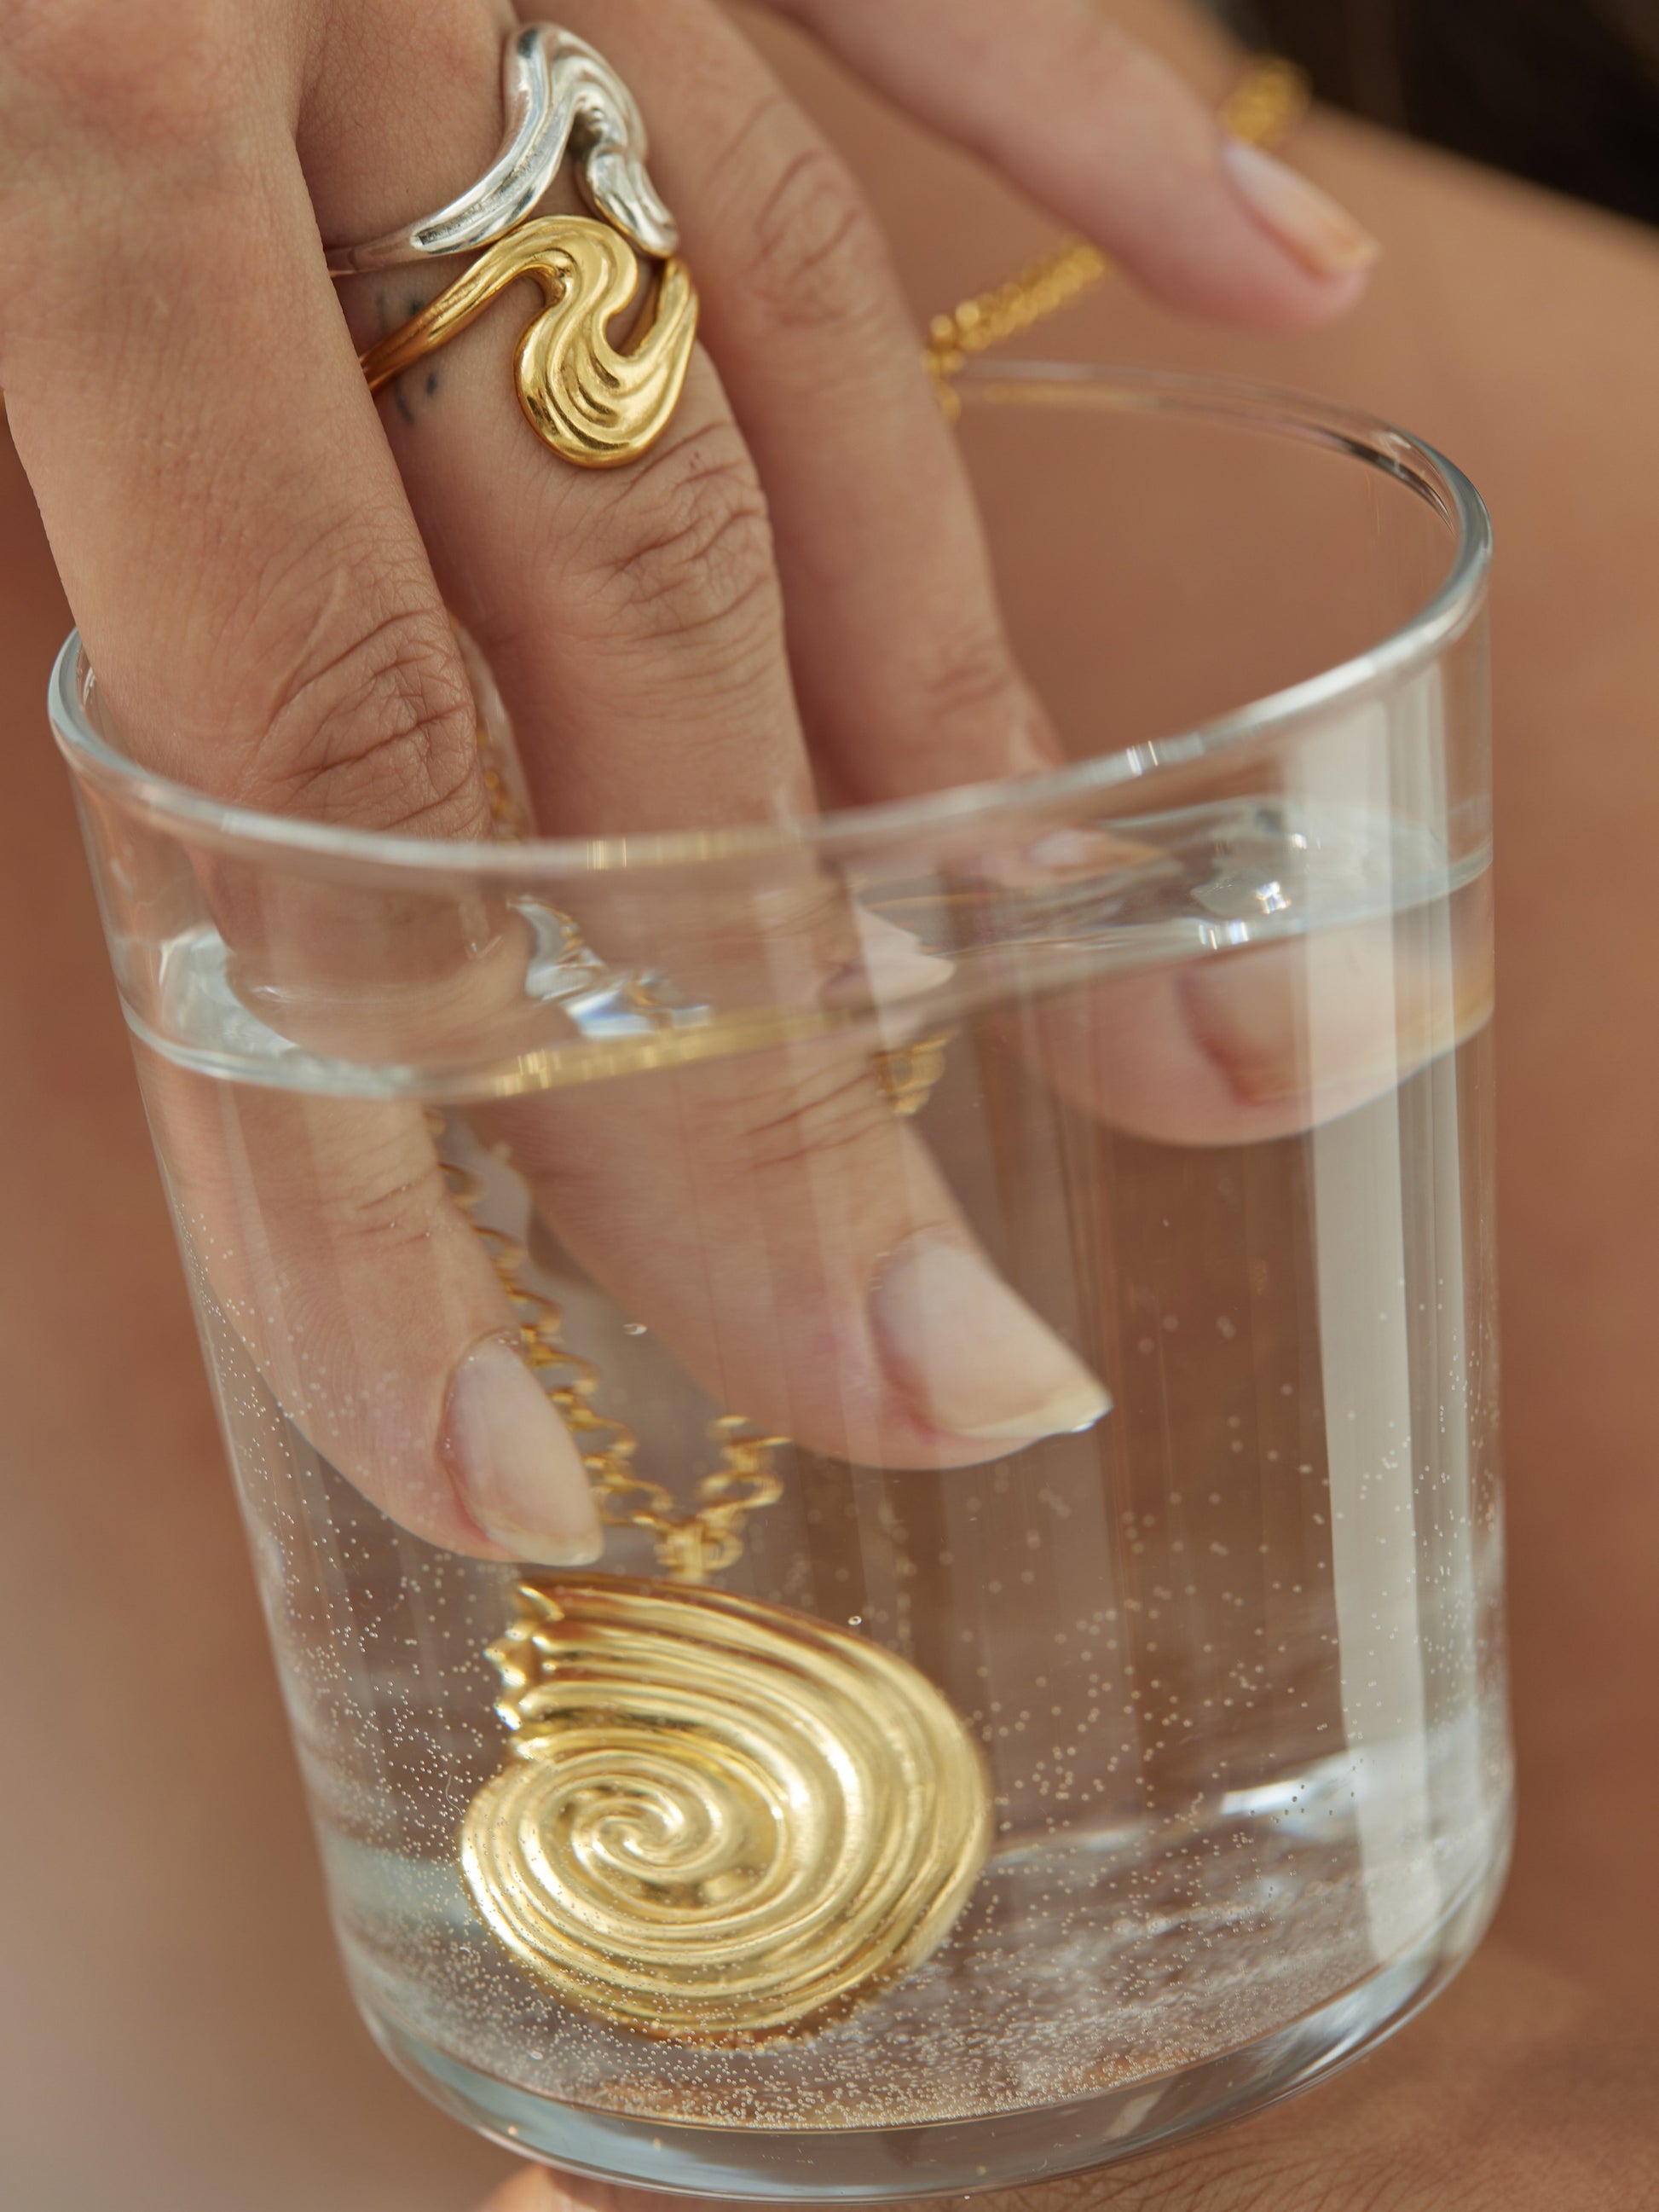 Hand with rings putting fingers and necklace in a glass of water